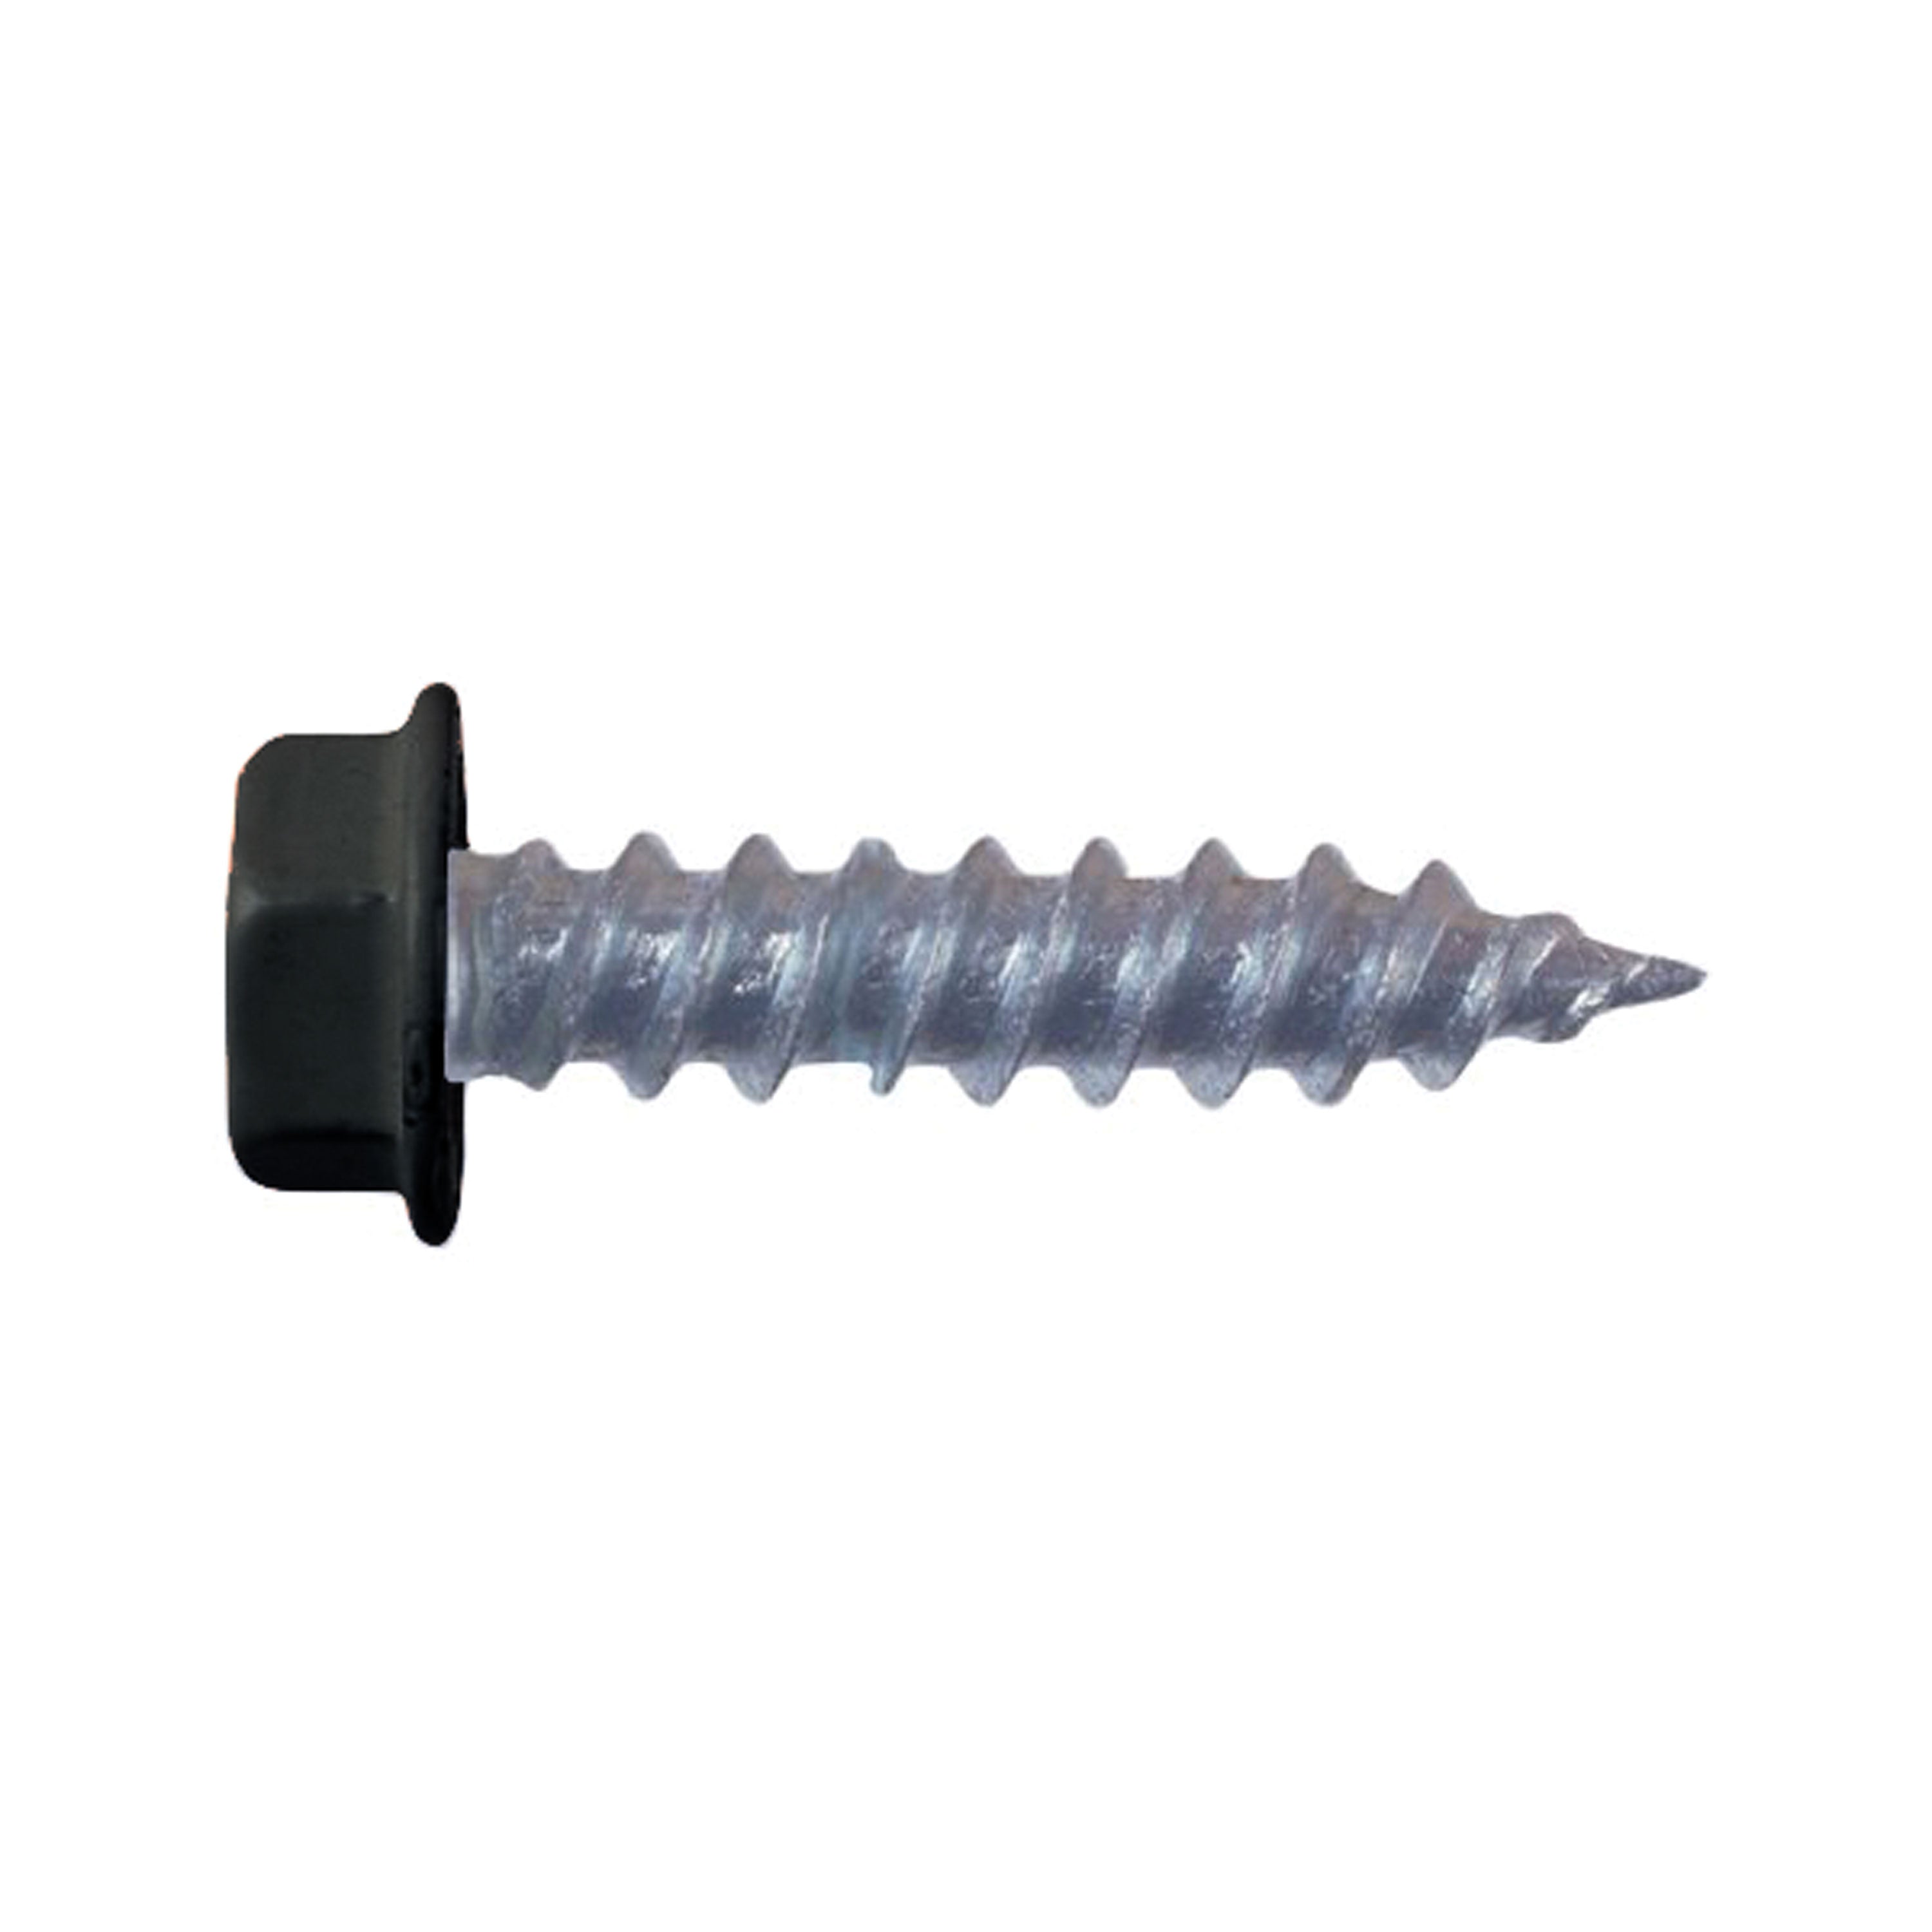 AP Products 012-TR500 BL 8 x 1 #8 Hex Washer Head Screw - 1", Black, Pack of 500